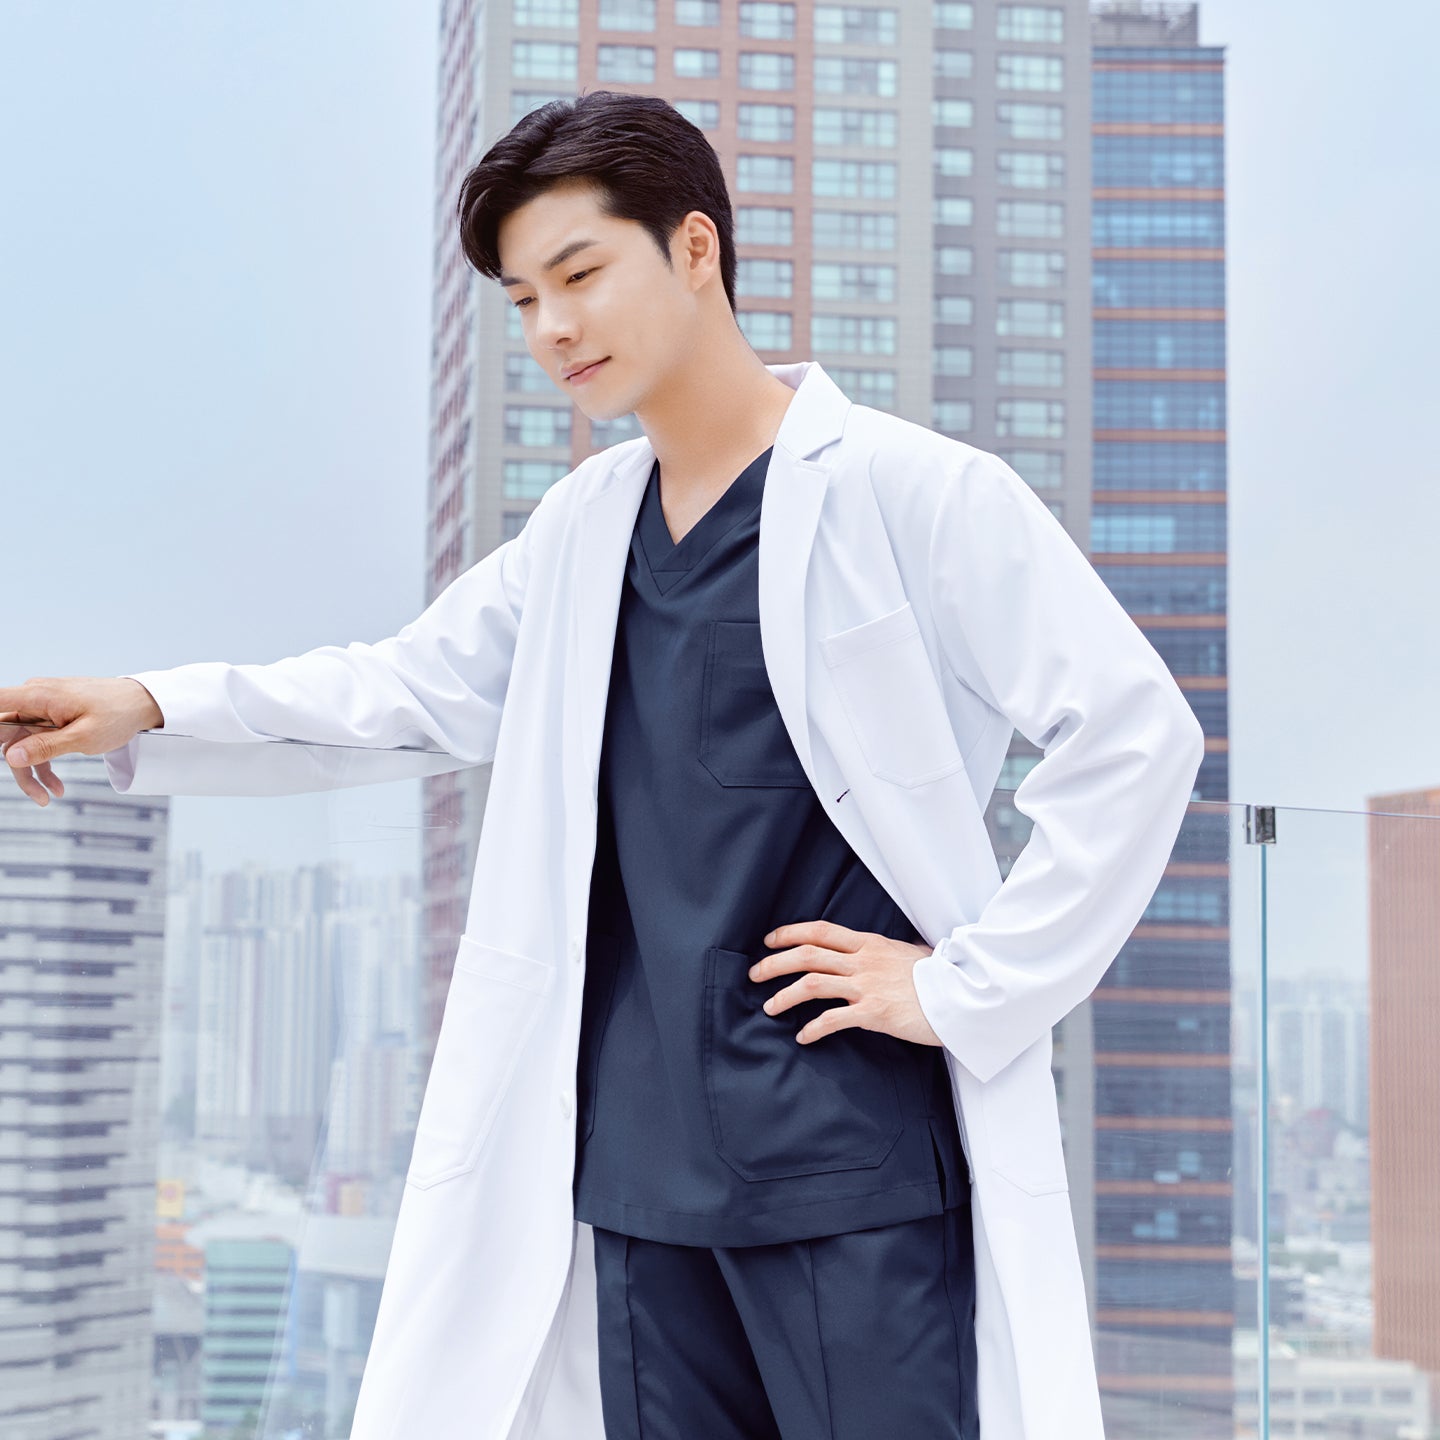 Man in a long lab coat over a front zipper scrub top with chest and side pockets, standing with one hand on a railing and the other on his hip, cityscape in the background,White